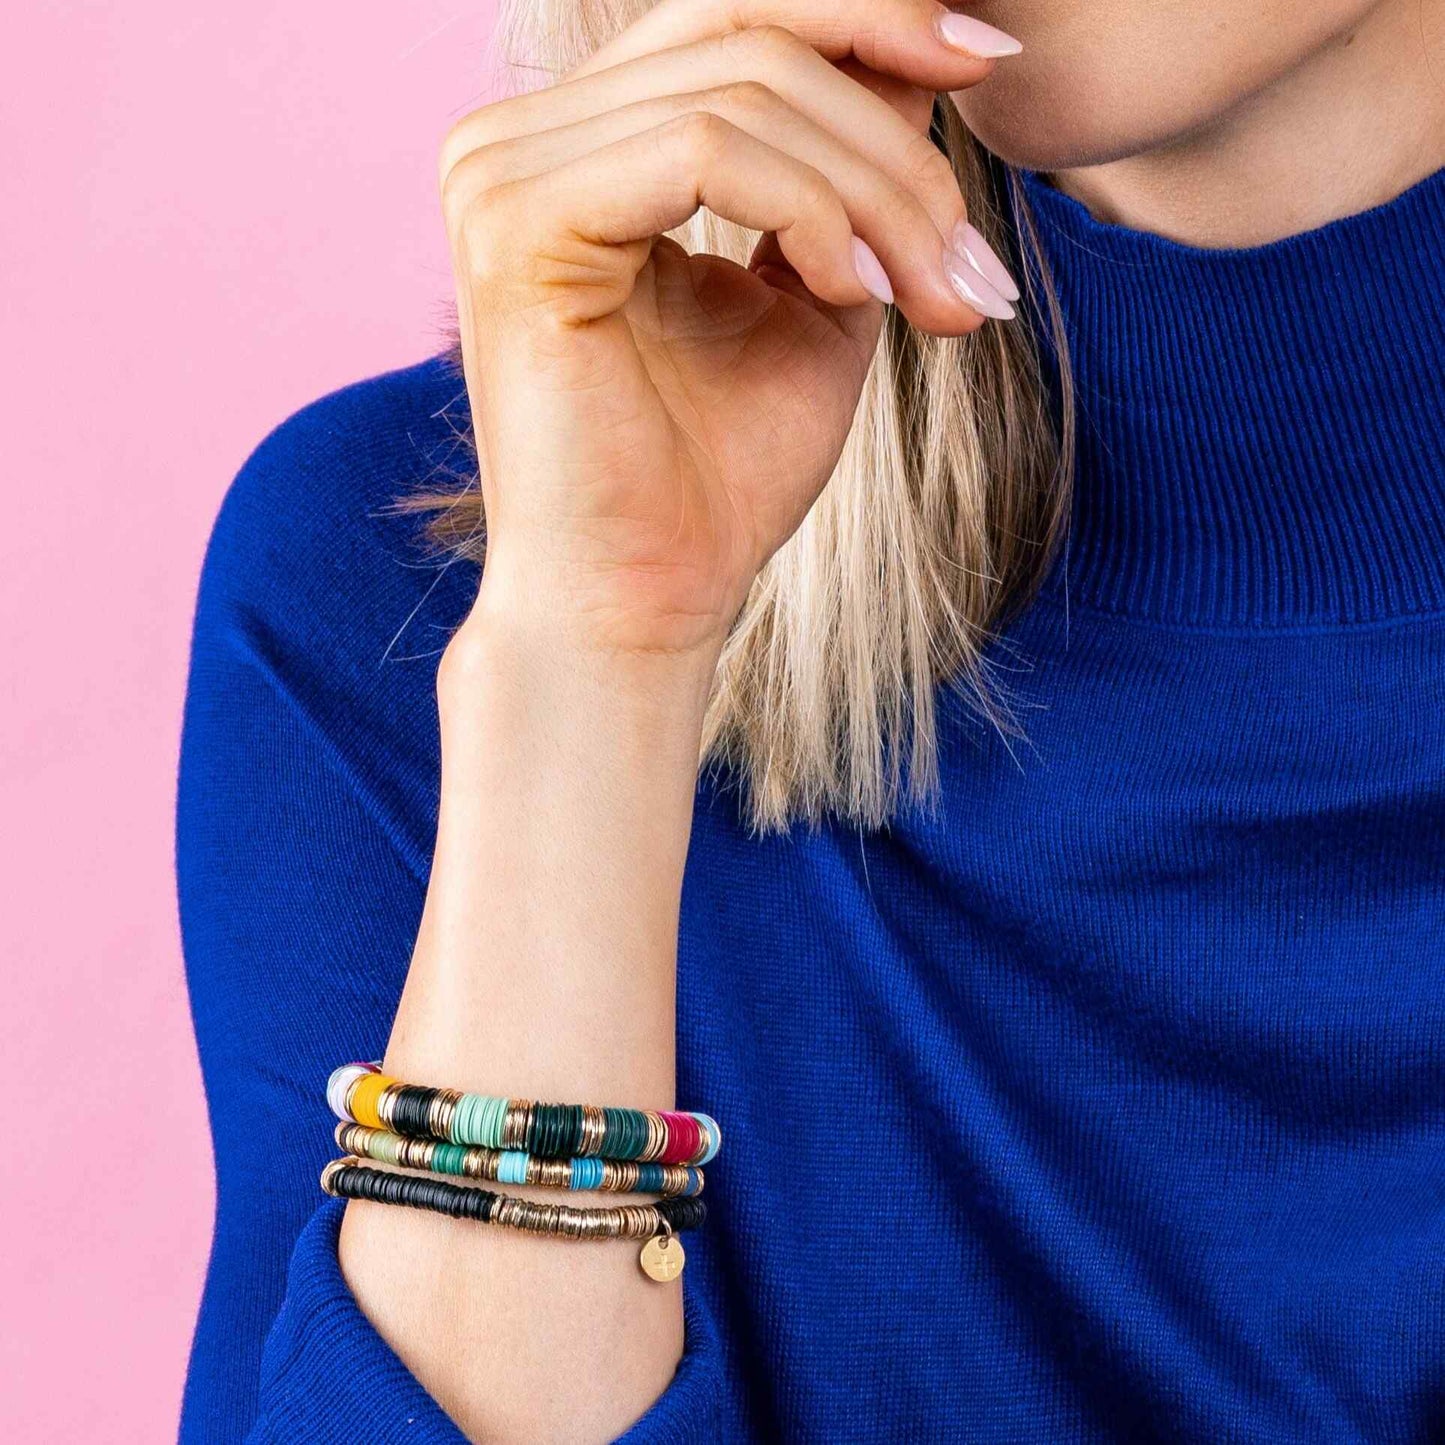 Mint and Citron Stripe Slide and Stack Bracelet by INK+ALLOY